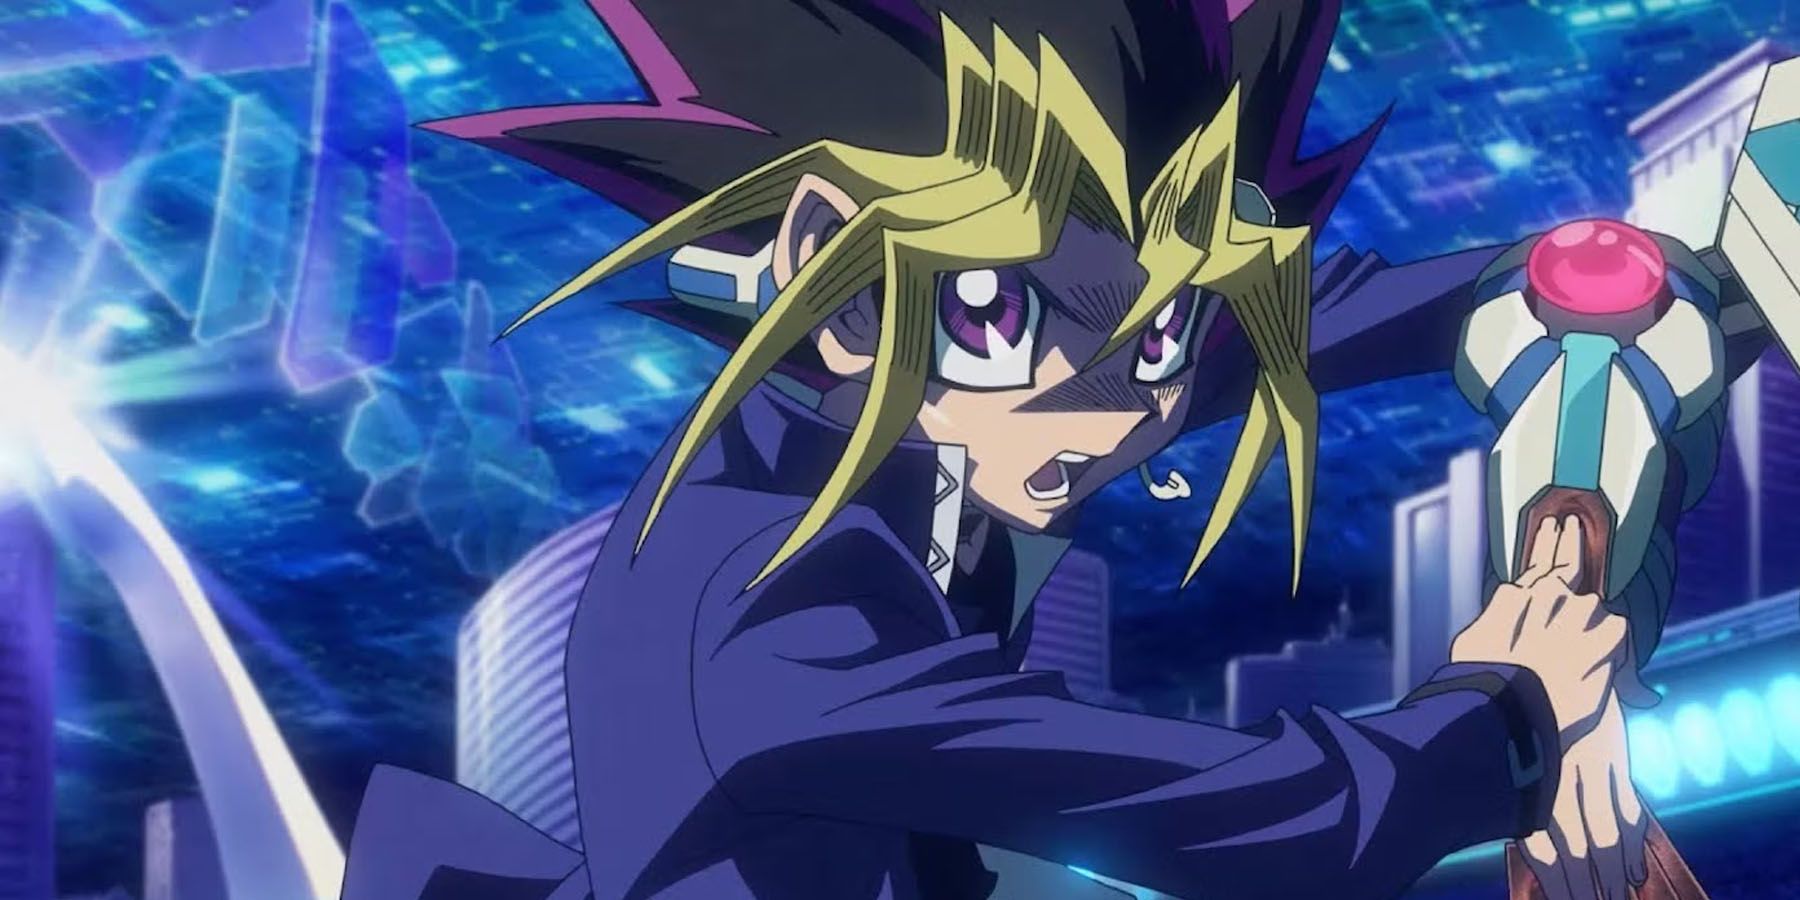 A screenshot of Yugi Muto drawing a card from his Duel Disk in Yu-Gi-Oh: Dark Side of Dimensions.